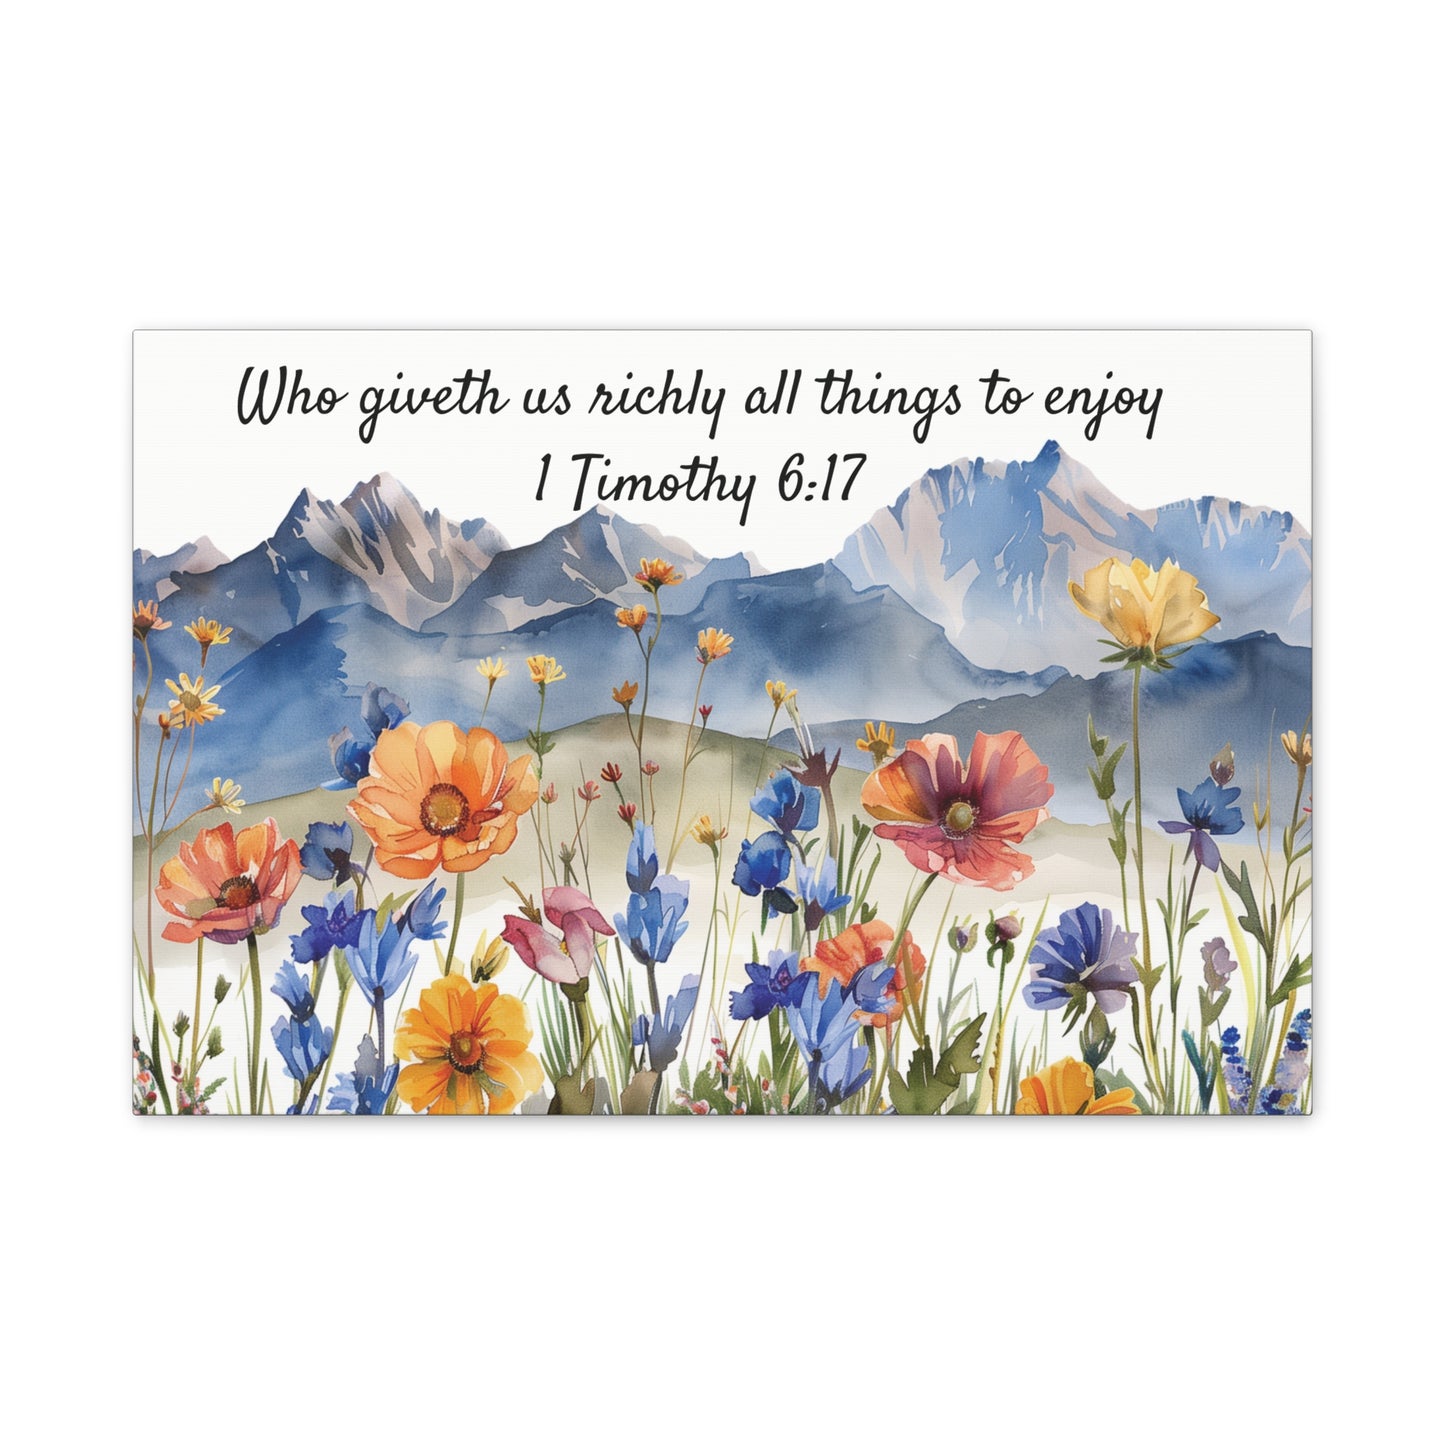 Colorado Bloom Art Canvas - Stunning Wildflower Art for Your Home - Print #6